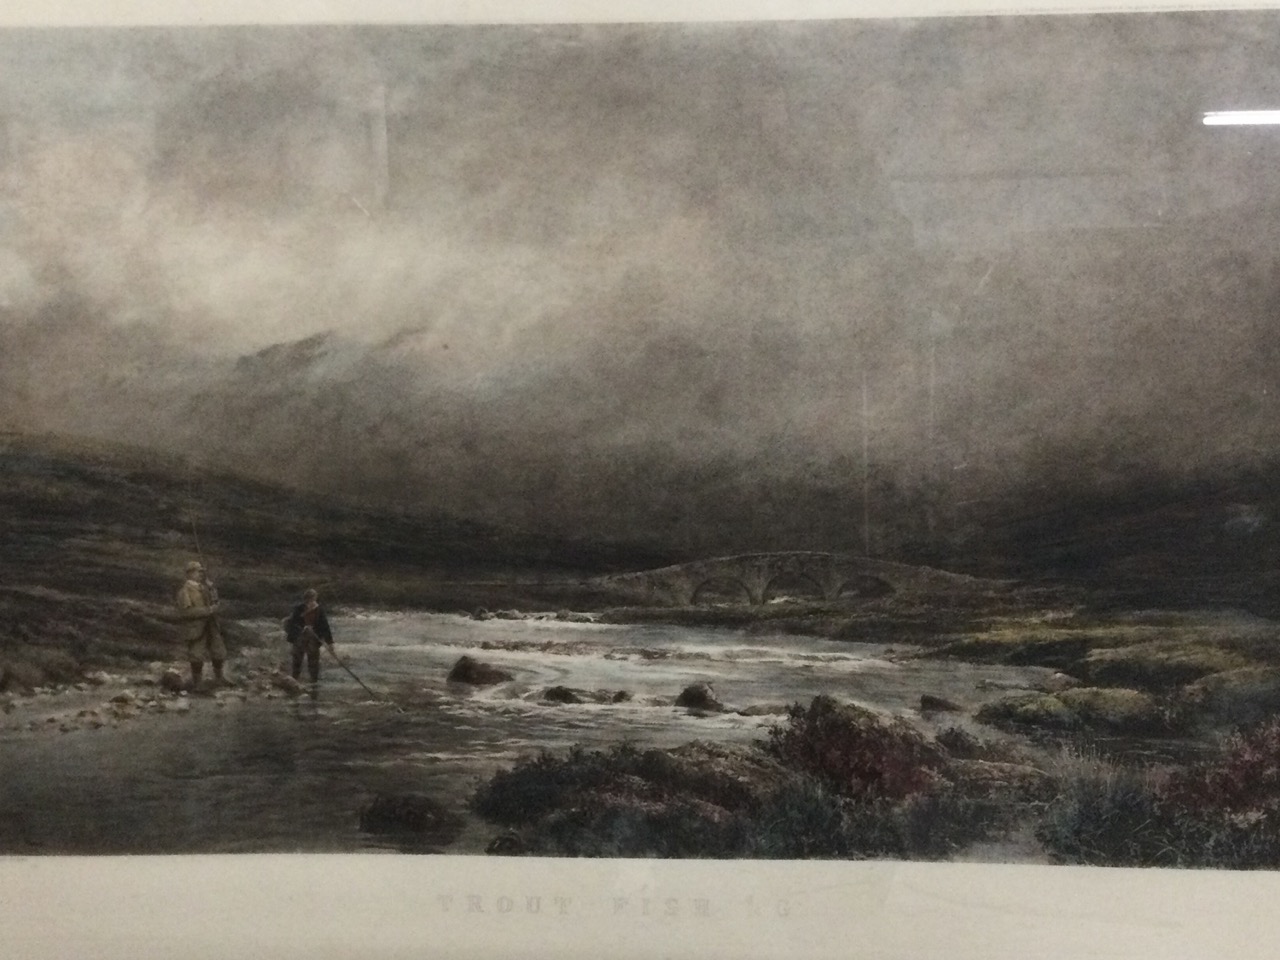 Douglas Adams, Trout Fishing, a large lithographic river landscape fishing print taken from the